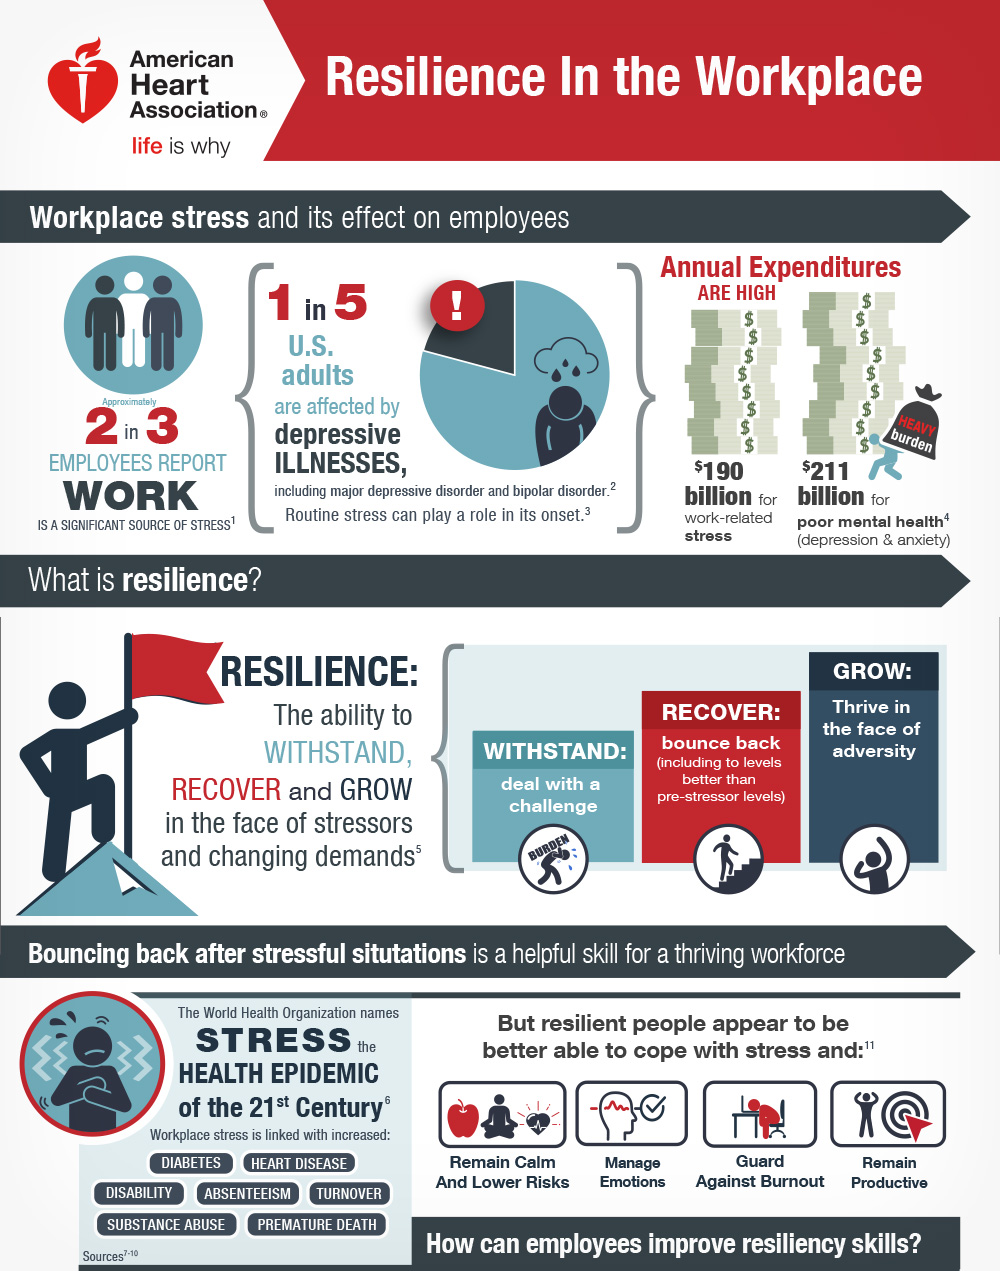 Studies suggest resilience training may be a useful primary prevention strategy for employers to improve employee health and engagement